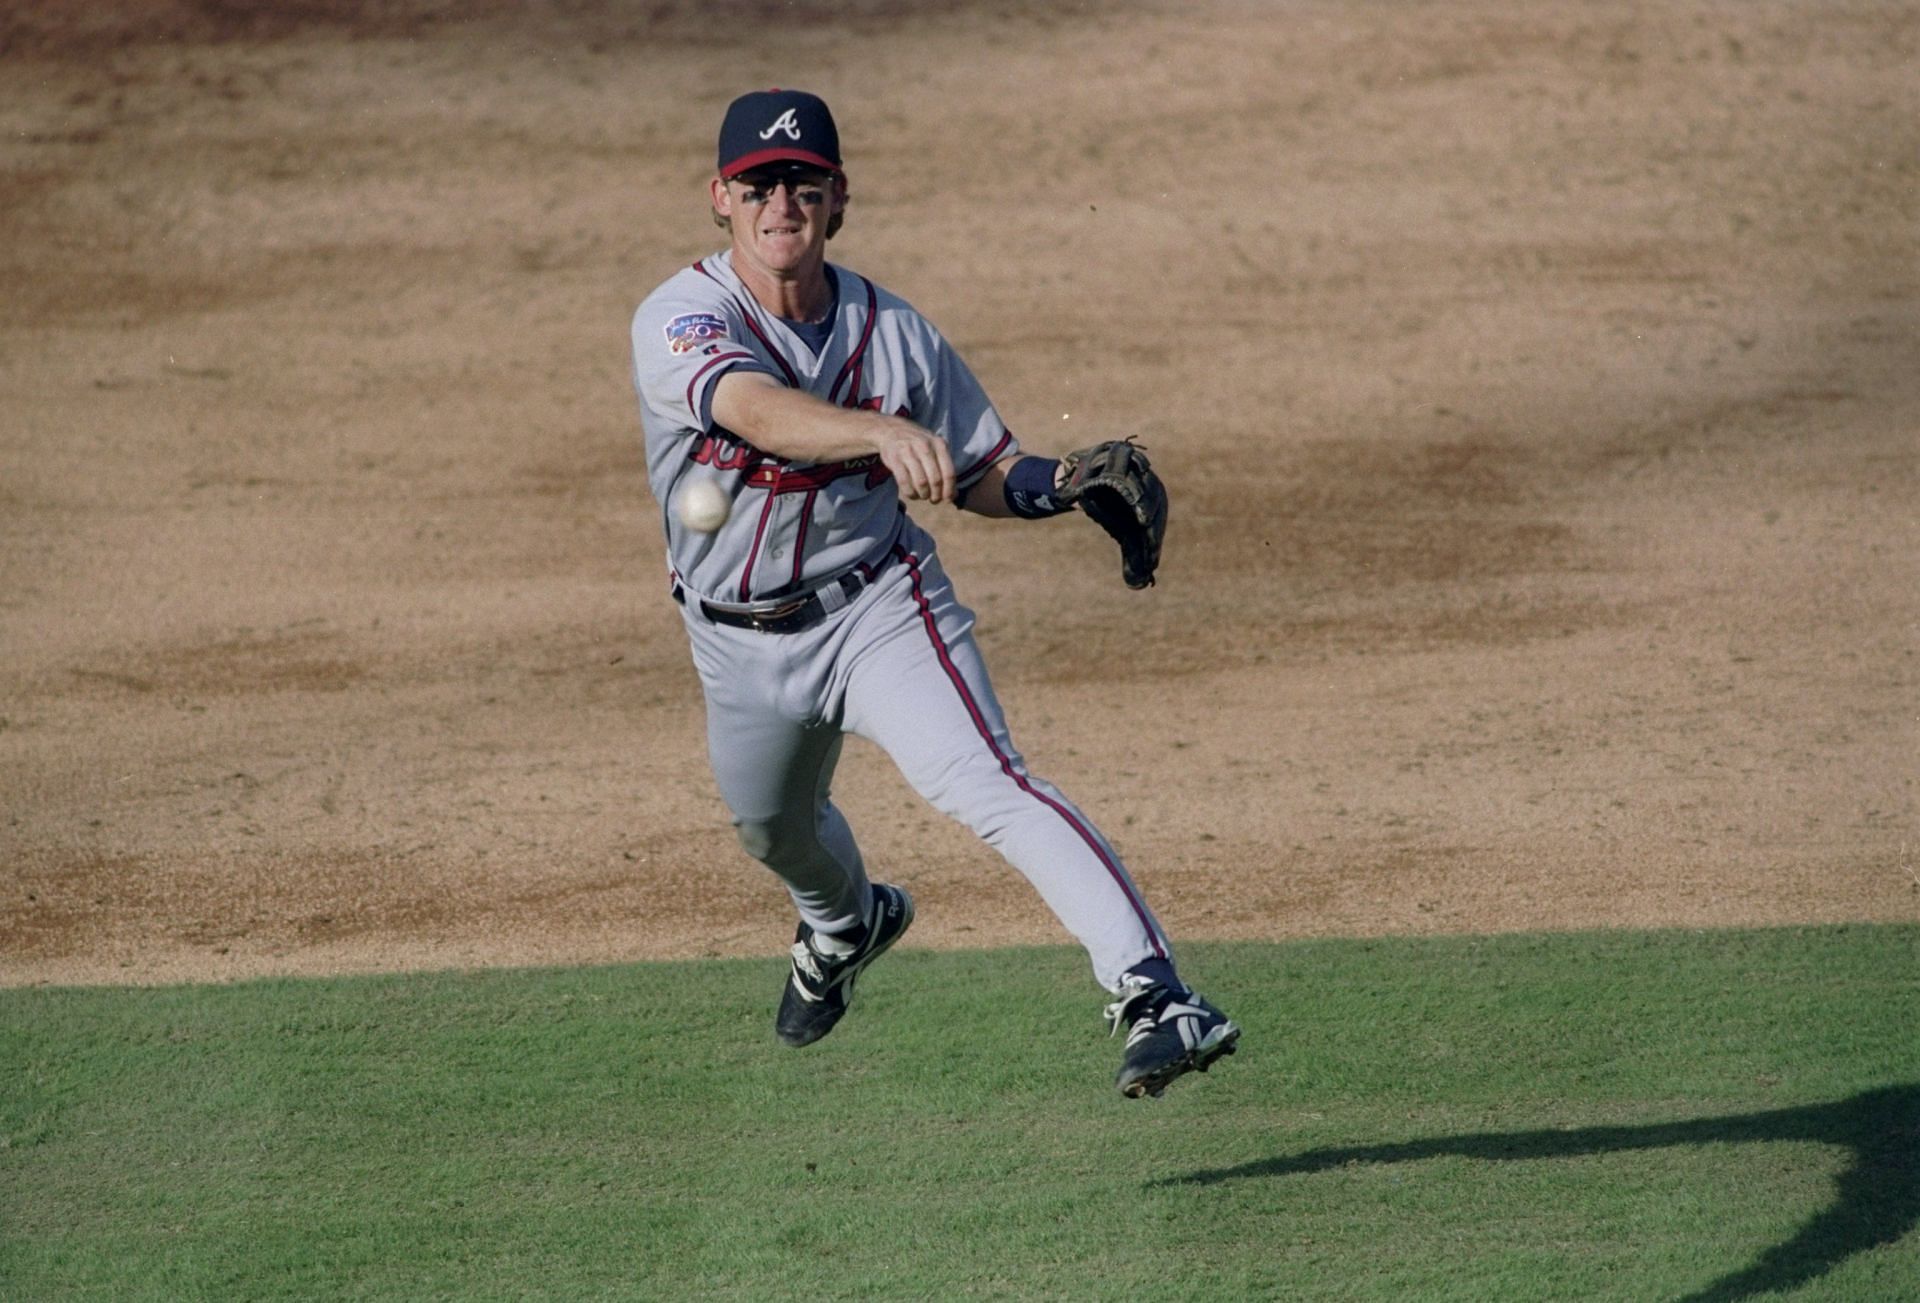 Jeff Blauser playing shortstop for the Braves